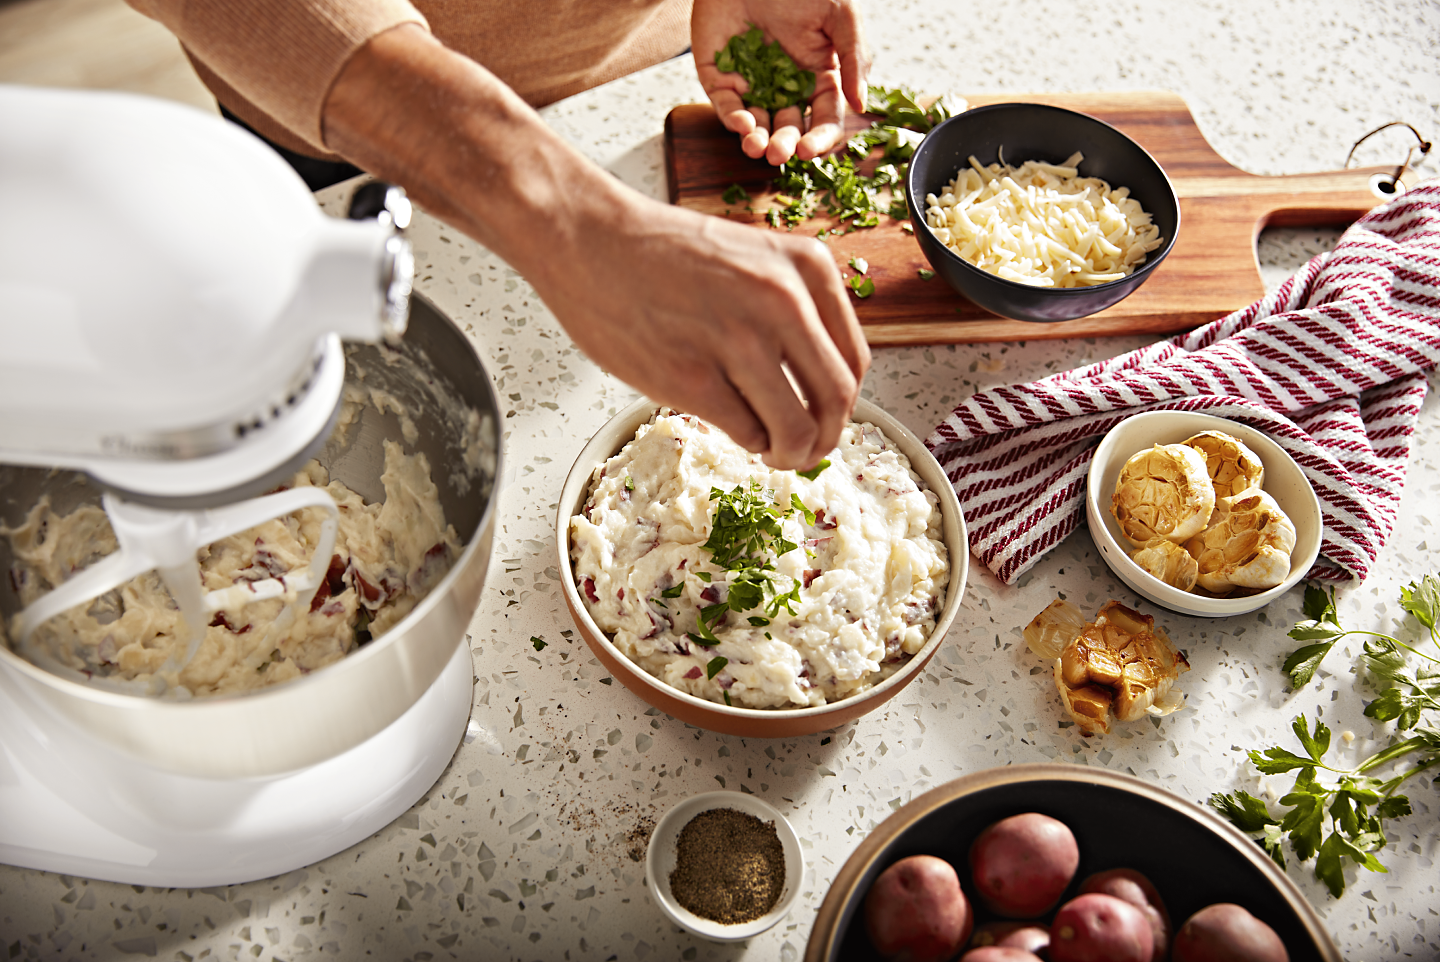 https://kitchenaid-h.assetsadobe.com/is/image/content/dam/business-unit/kitchenaid/en-us/marketing-content/site-assets/page-content/pinch-of-help/how-to-make-mashed-potatoes-with-a-stand-mixer/Mashed-Potato-Stand-Mixer_3.png?fmt=png-alpha&qlt=85,0&resMode=sharp2&op_usm=1.75,0.3,2,0&scl=1&constrain=fit,1